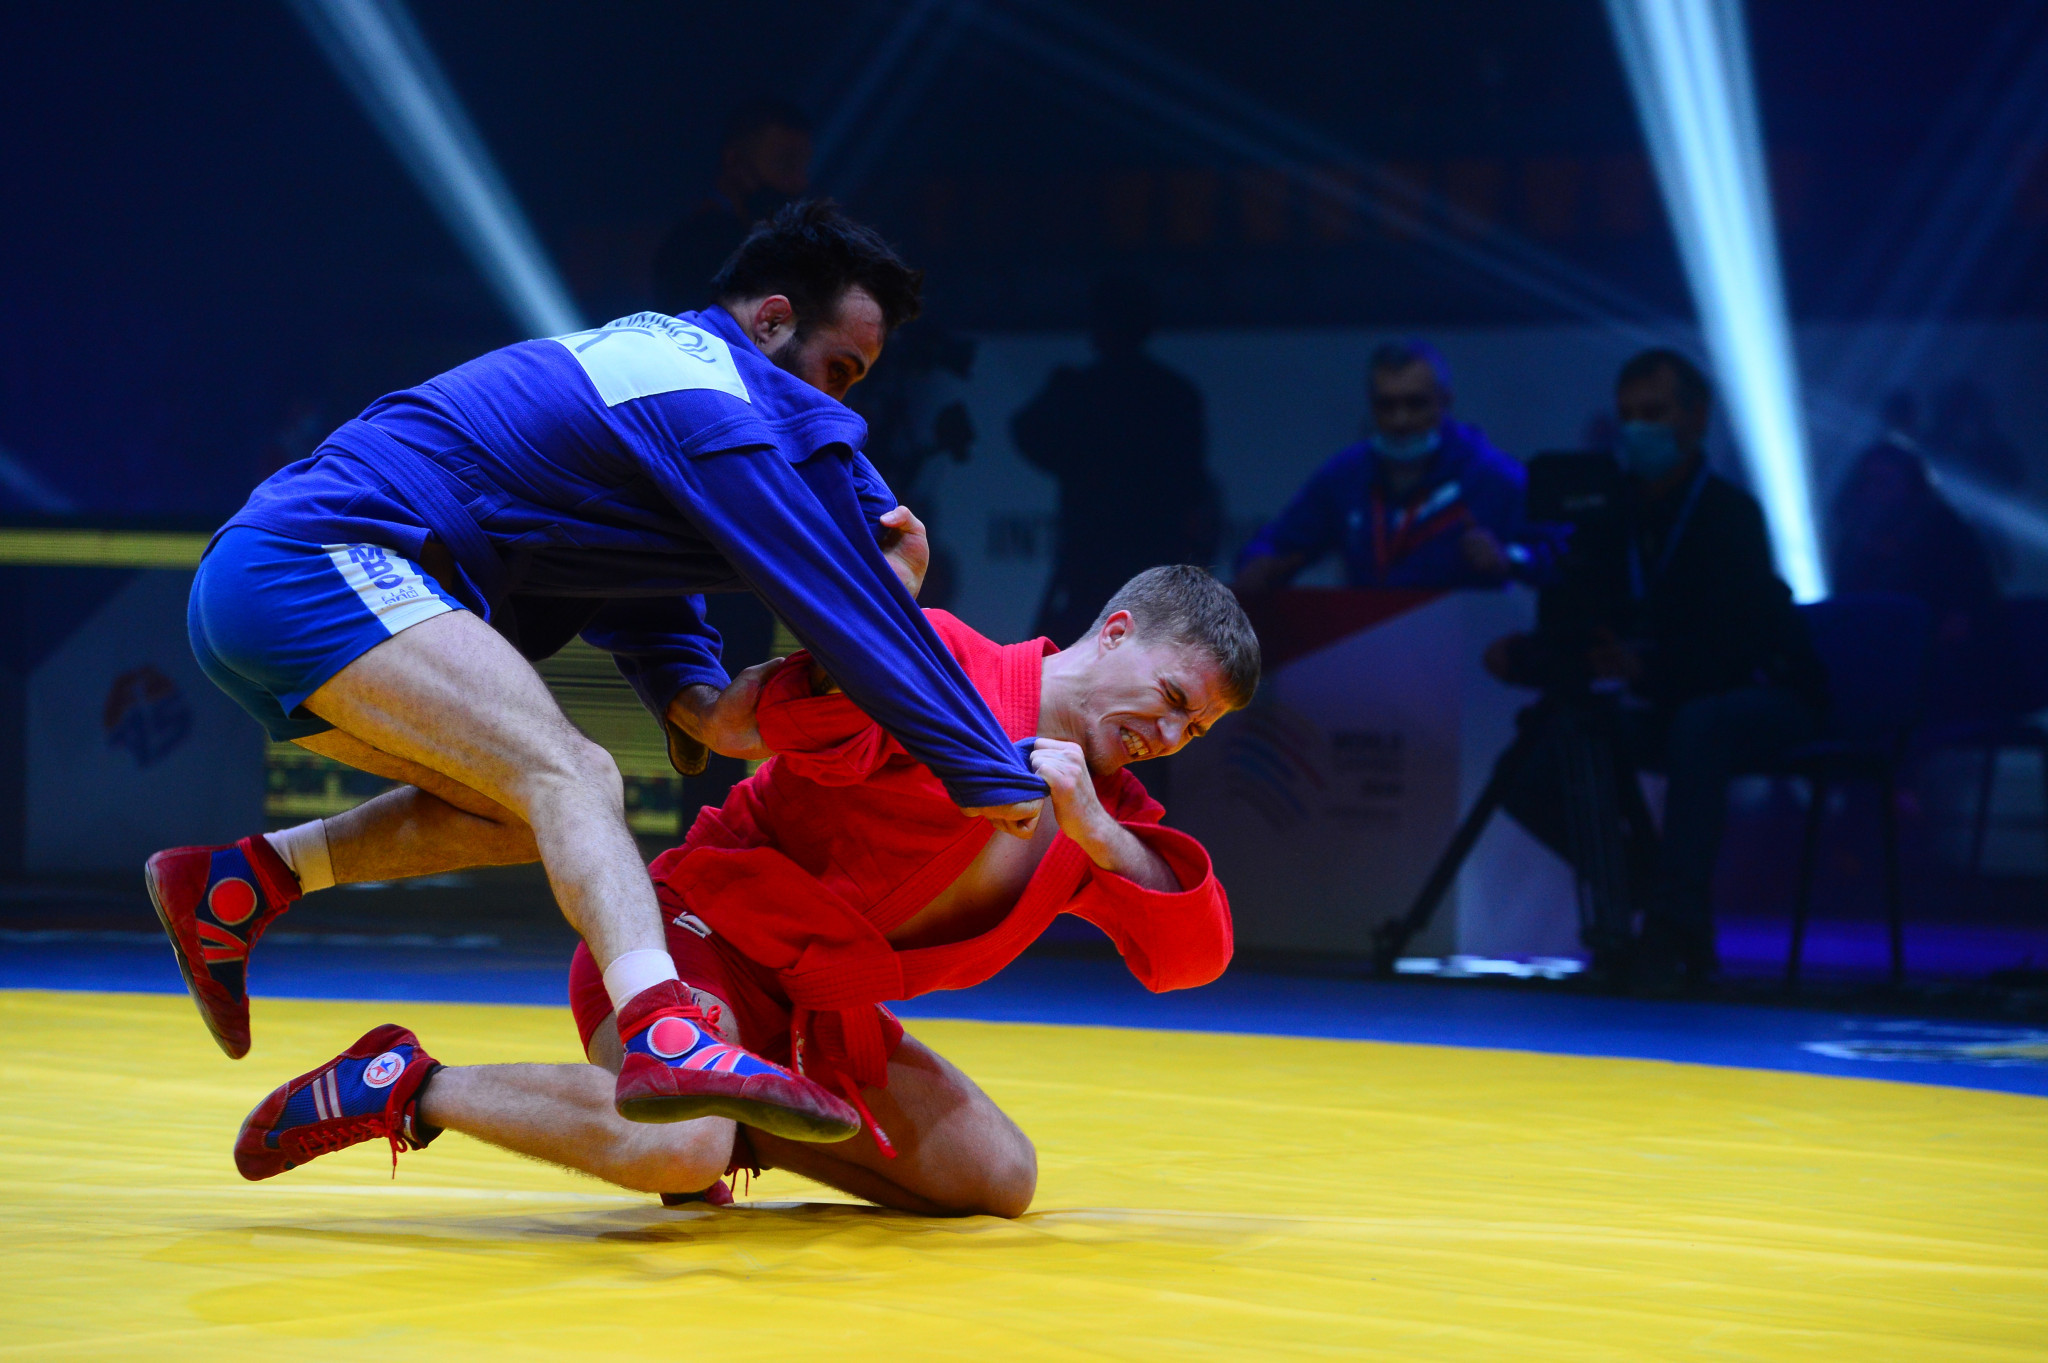 Russian Vladimir Gladkikh, in red, scrapped to a victory in the men's 57kg ©FIAS